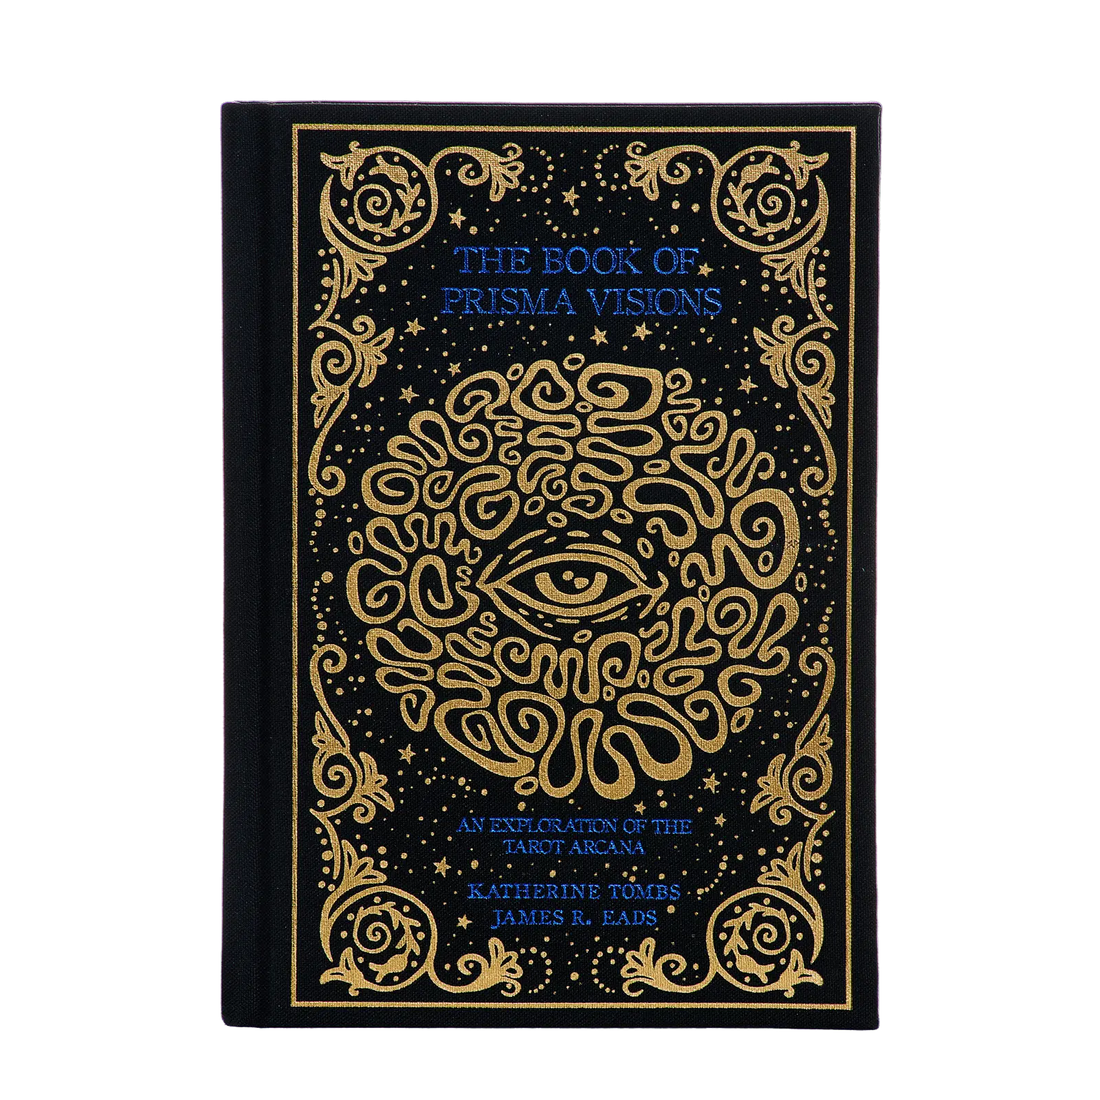 the big visions book | James R. Eads | The book of prisma visions